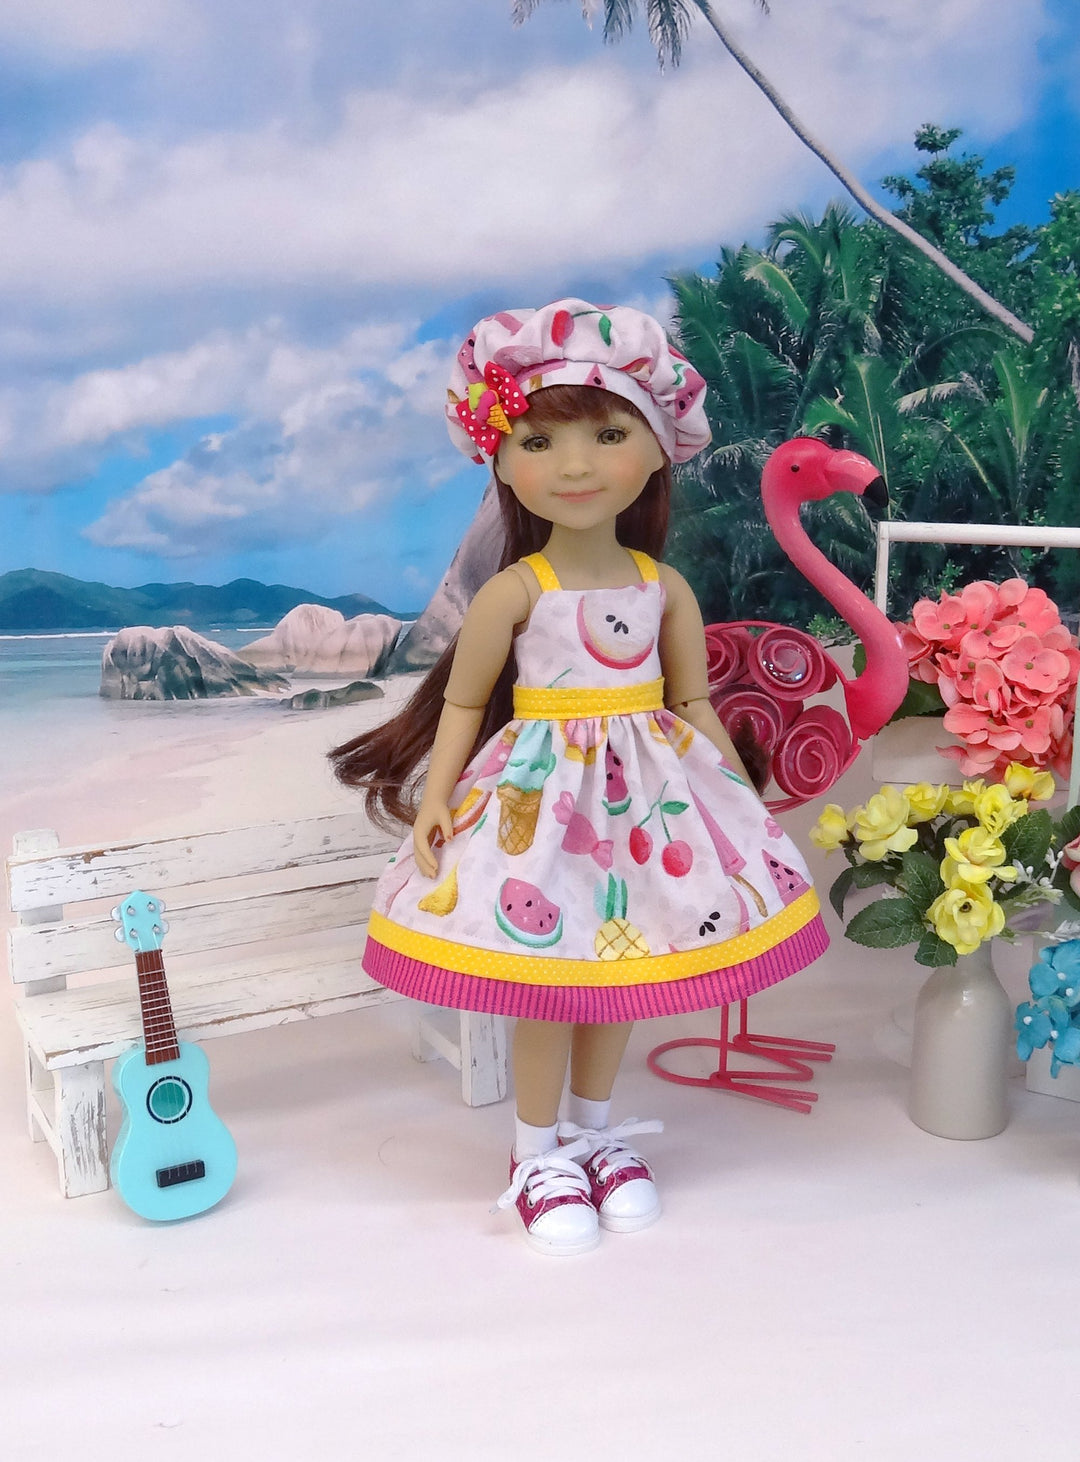 Summer Sweets - dress & jacket for Ruby Red Fashion Friends doll